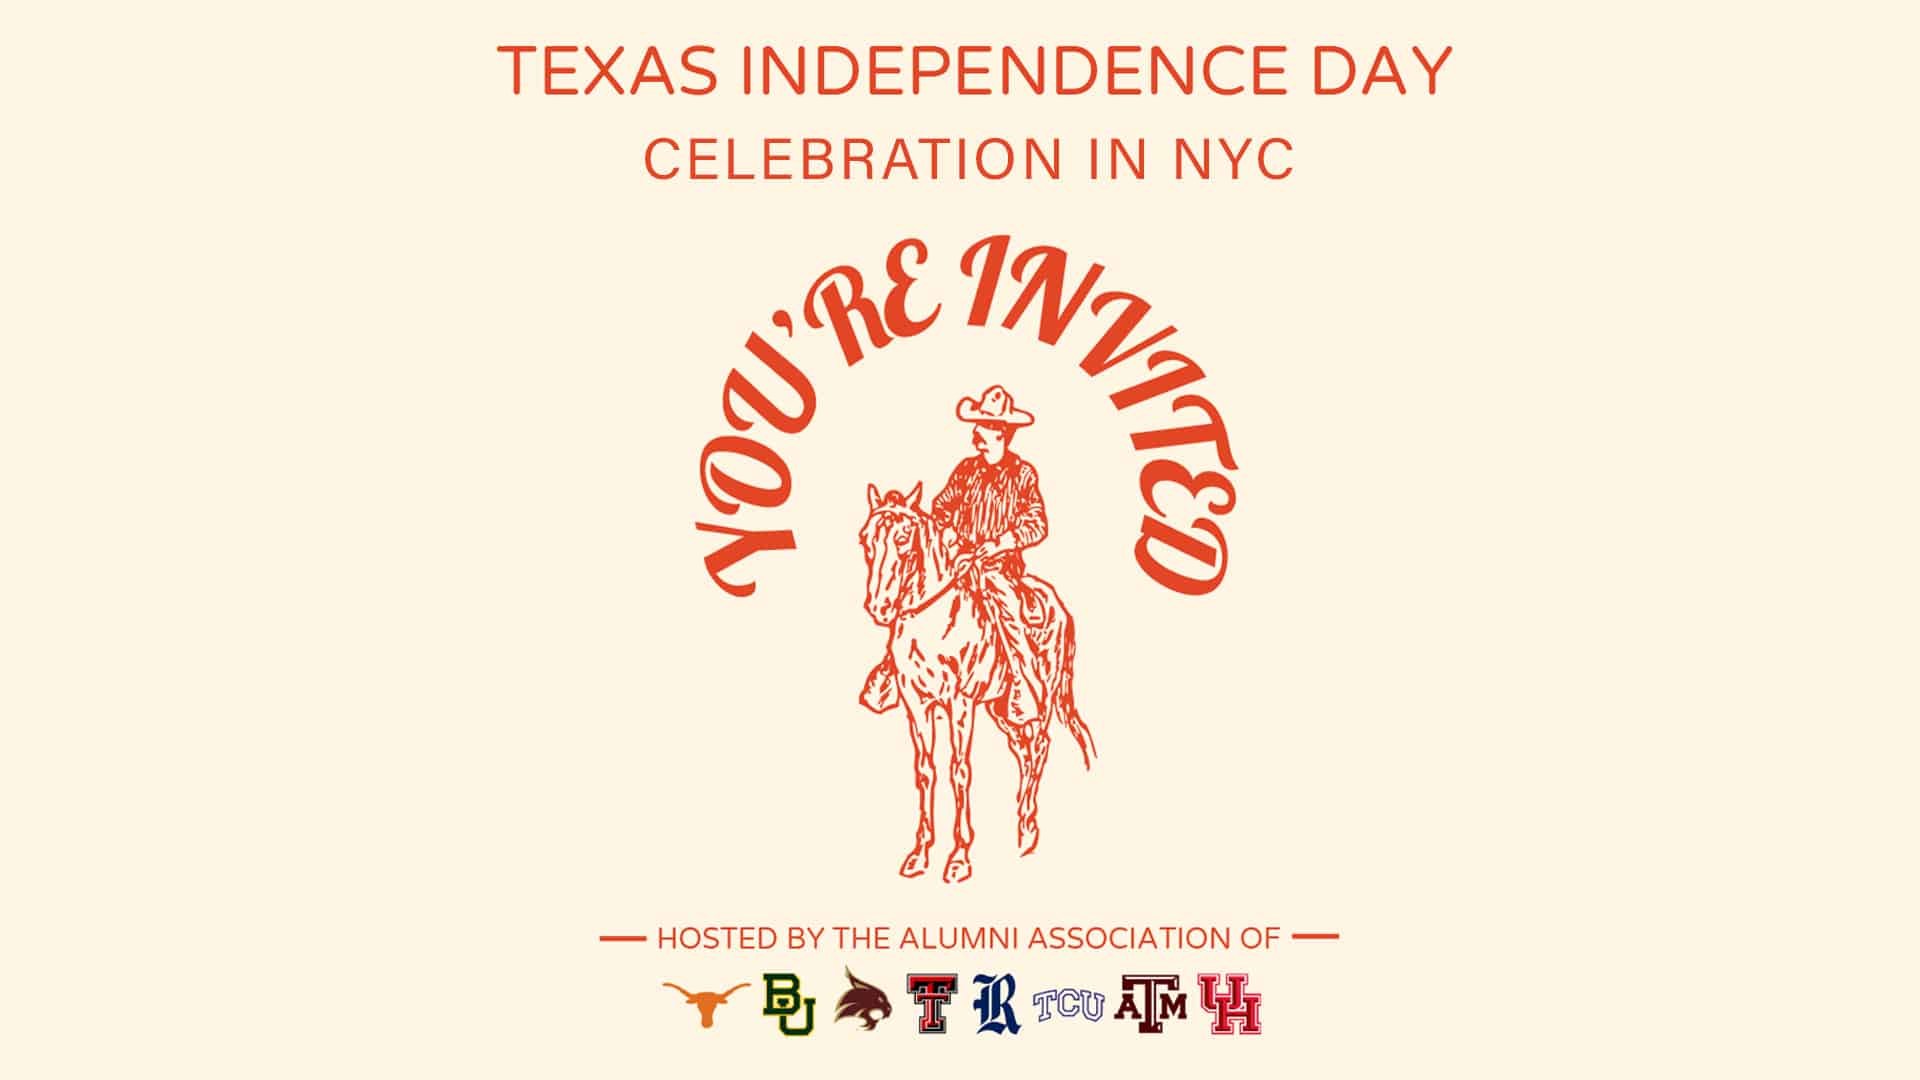 Graphic with text reading "Texas independence day celebration in NYC, you're invited" with a cowboy on a horse and text reading "hosted by the alumni association of" and logos from University of Texas, Baylor, Texas State, Texas Tech, Rice, Texas Cristian, A and M, and University of Houston